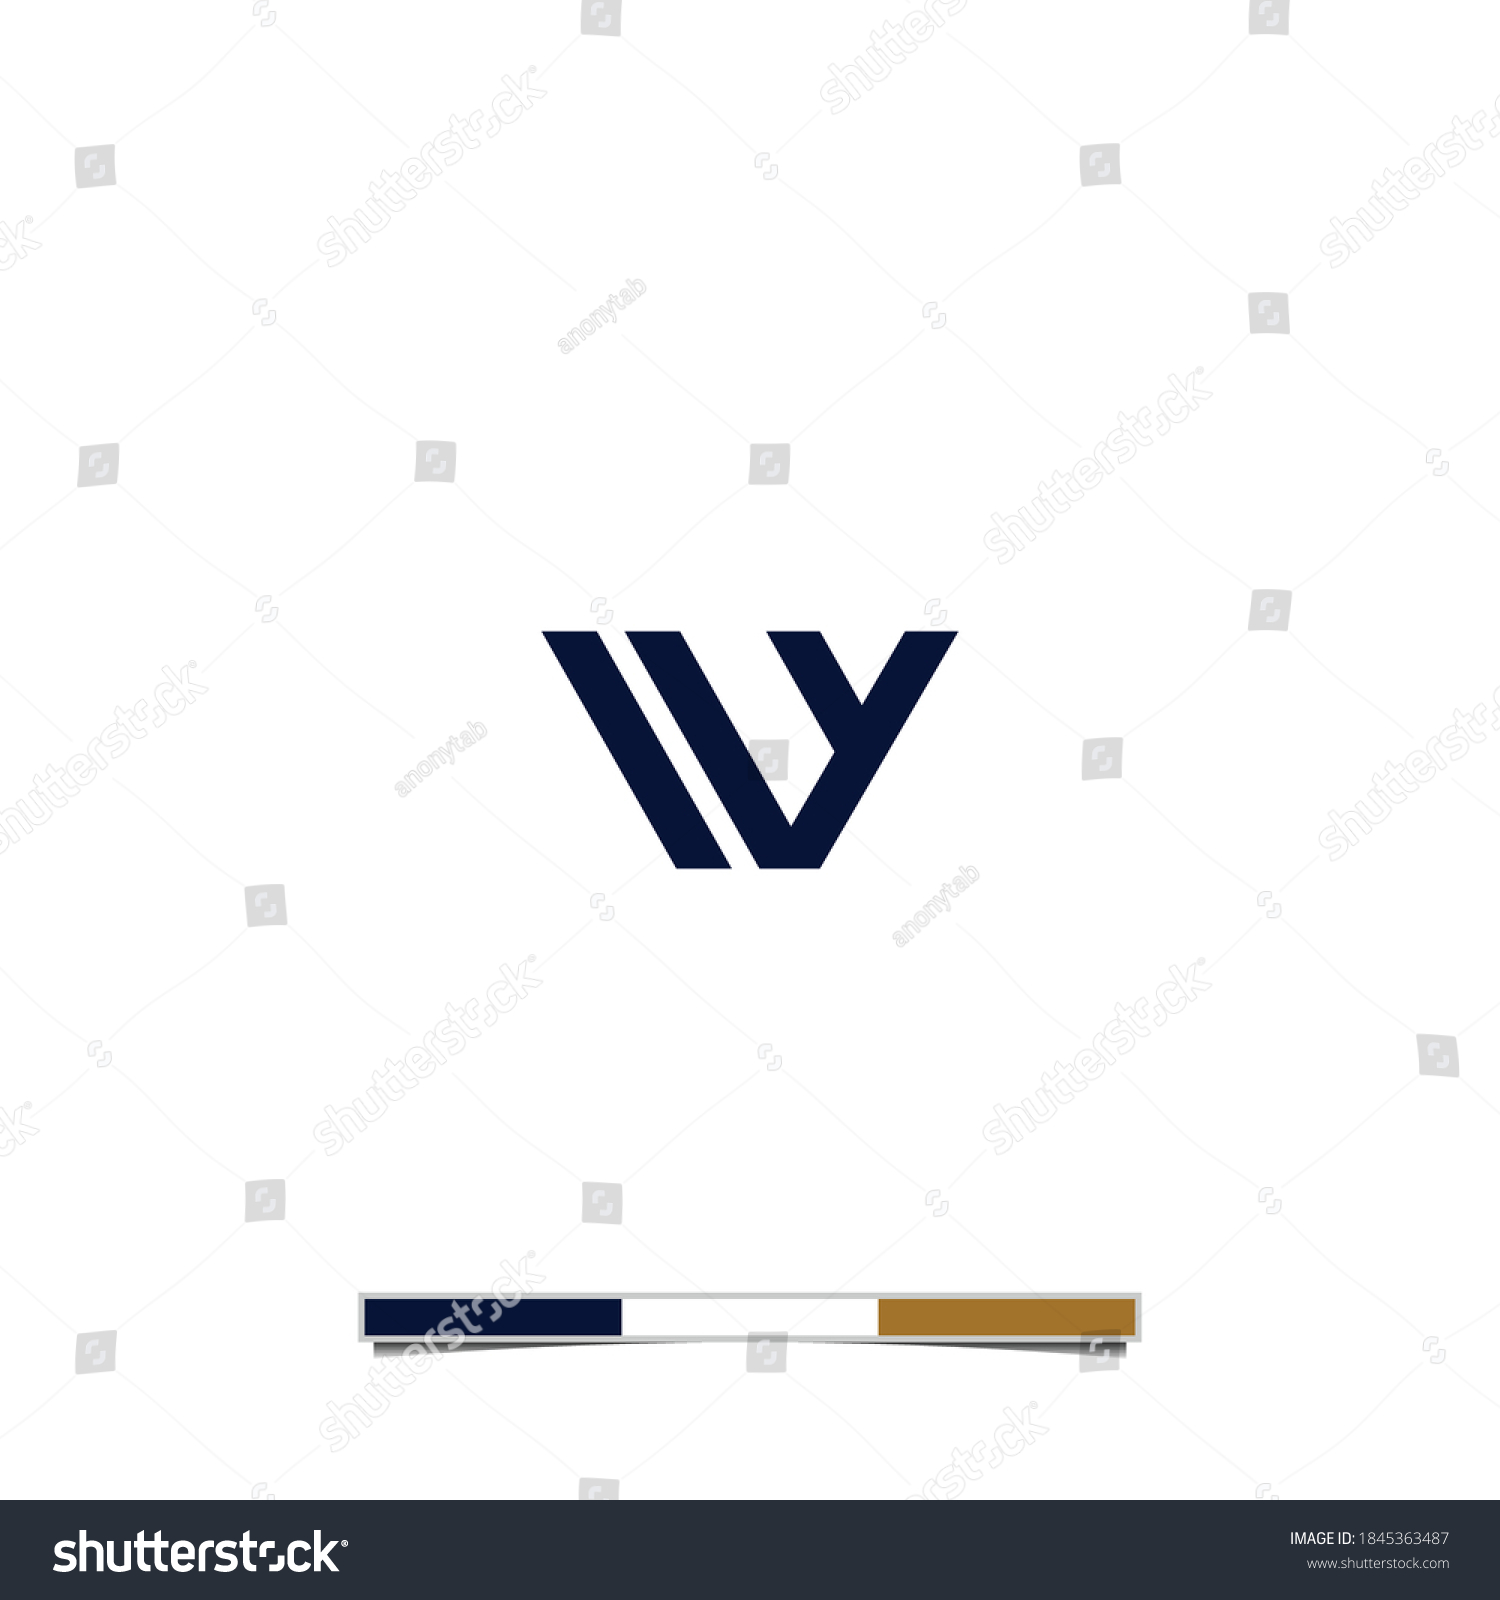 Minimal Letter IVY Logo Design, Outstanding - Royalty Free Stock Vector ...